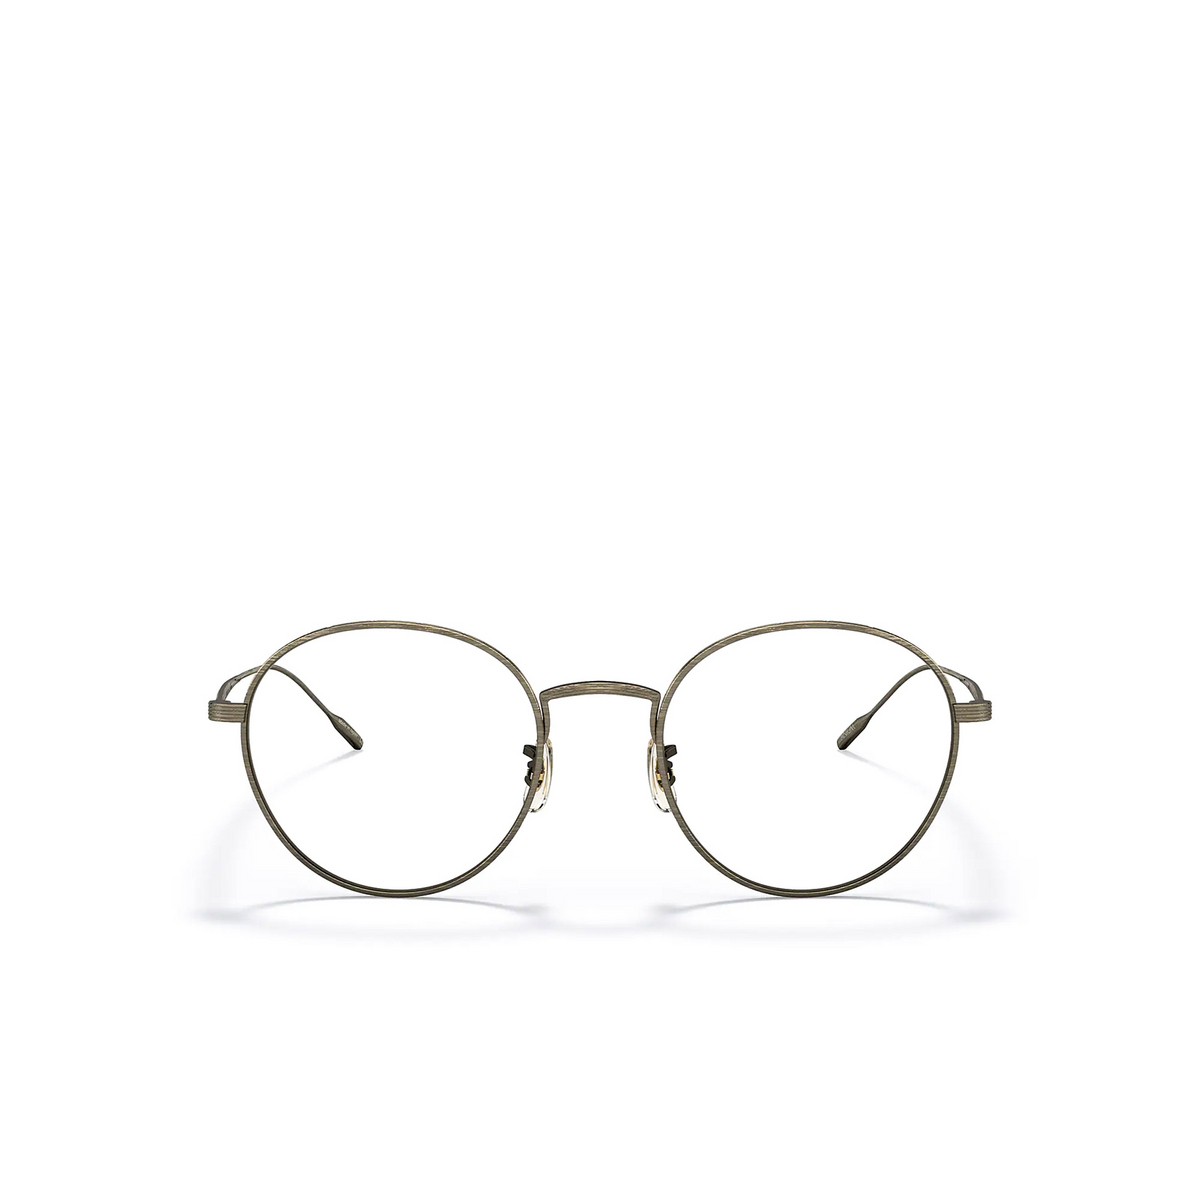 Occhiali da sole Oliver Peoples ALTAIR 5284SB Antique Gold - frontale